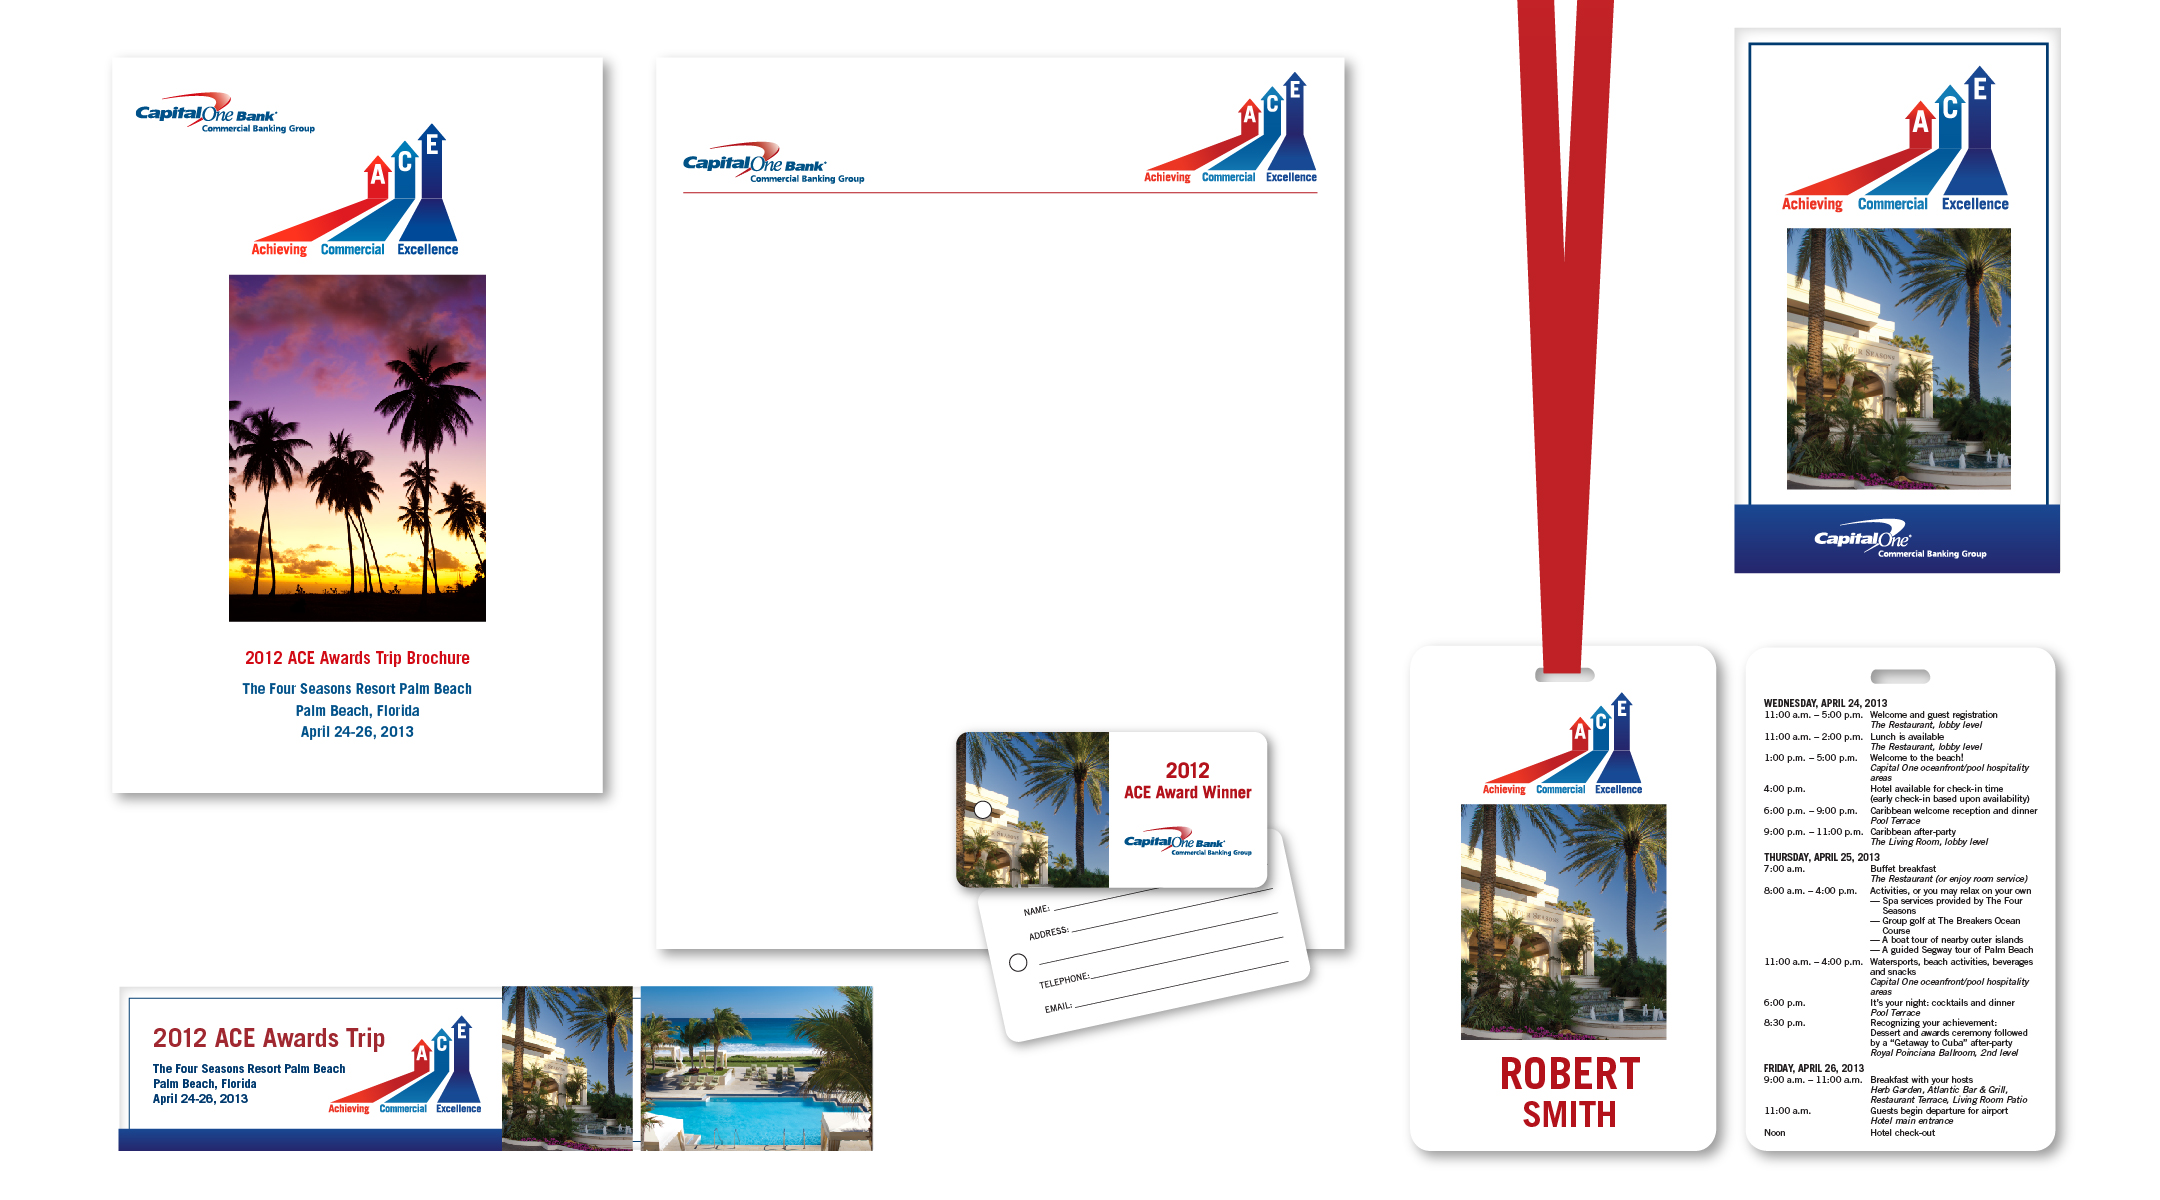 Corporate Incentive Award trip to Palm Beach, created for Capital One. Includes program of events, letterhead, luggage tags, agenda name badges, and banner ads.